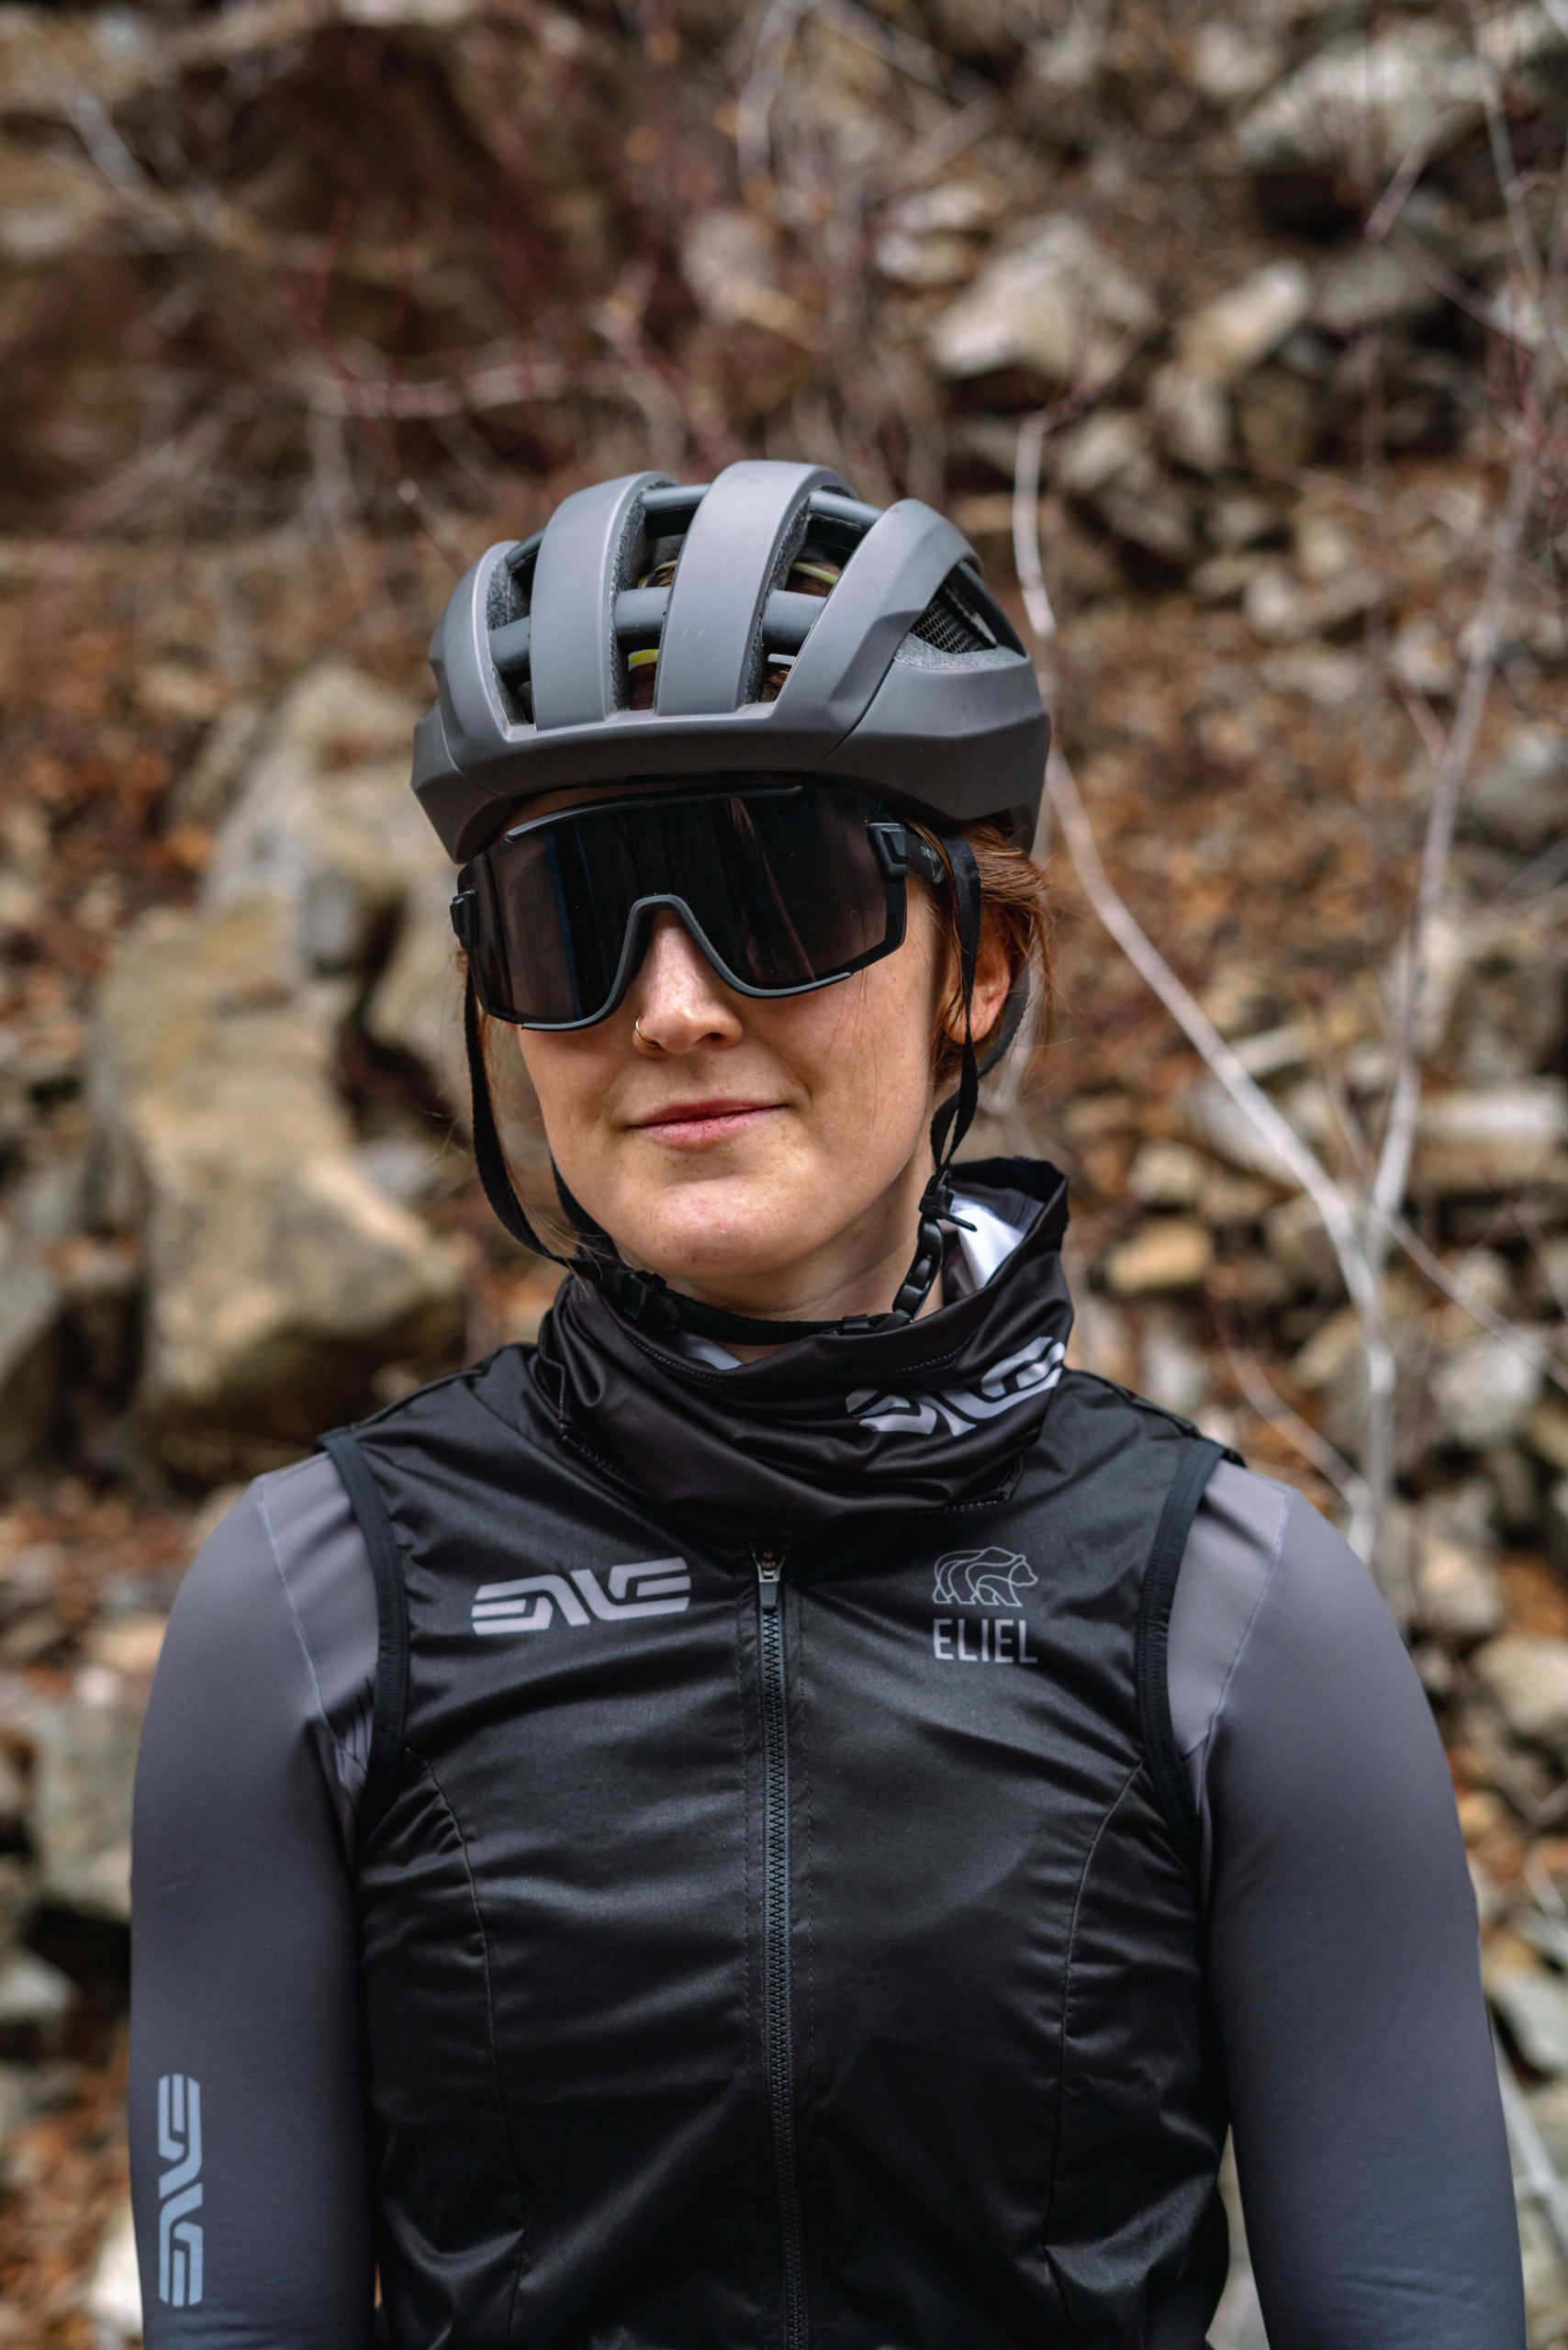 A woman wearing the ENVE neck gaiter and vest.